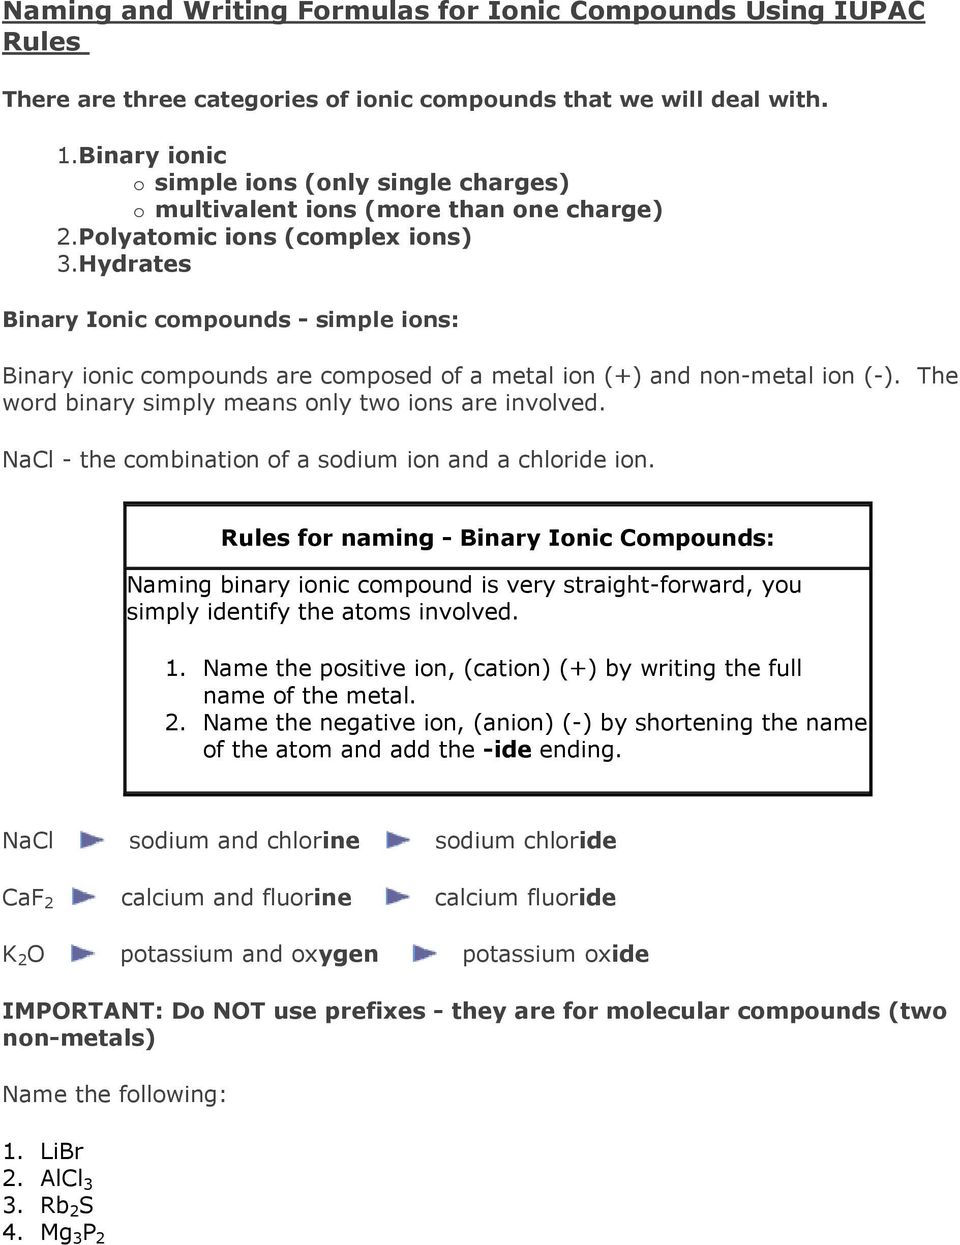 Naming and Writing Formulas for Ionic Compounds Using IUPAC Rules With Simple Binary Ionic Compounds Worksheet